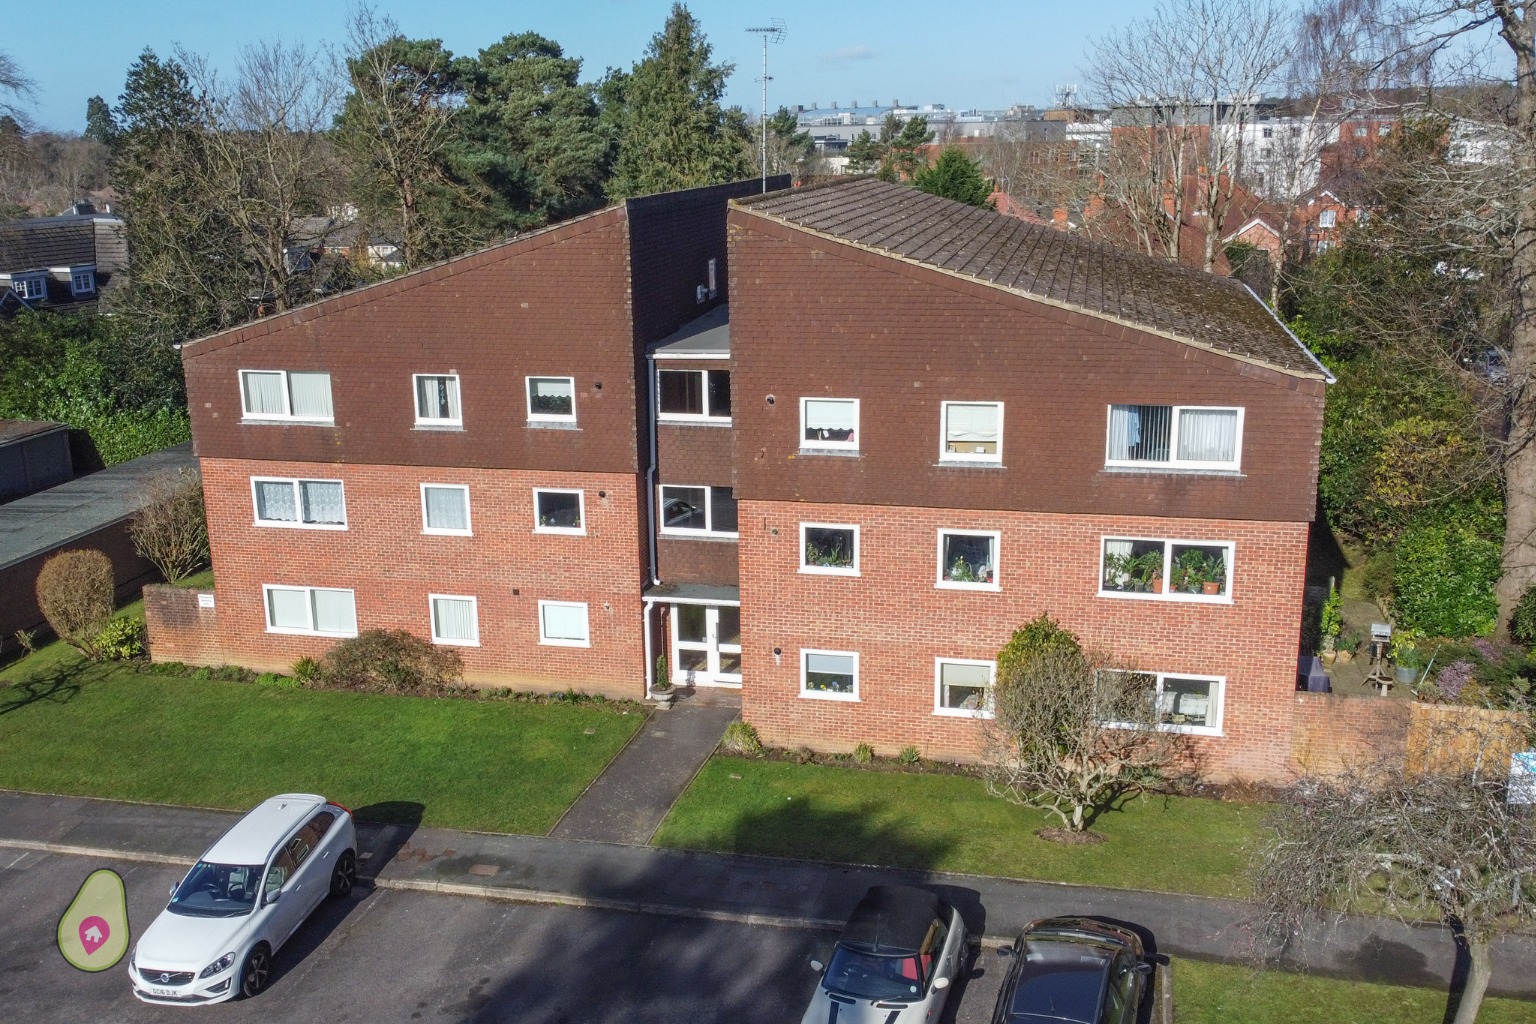 This apartment in Court Gardens offers two large double bedrooms, an even larger living/dining room, a refitted kitchen, shower room and the bonus of a garage, all in a very convenient location for local amenities.